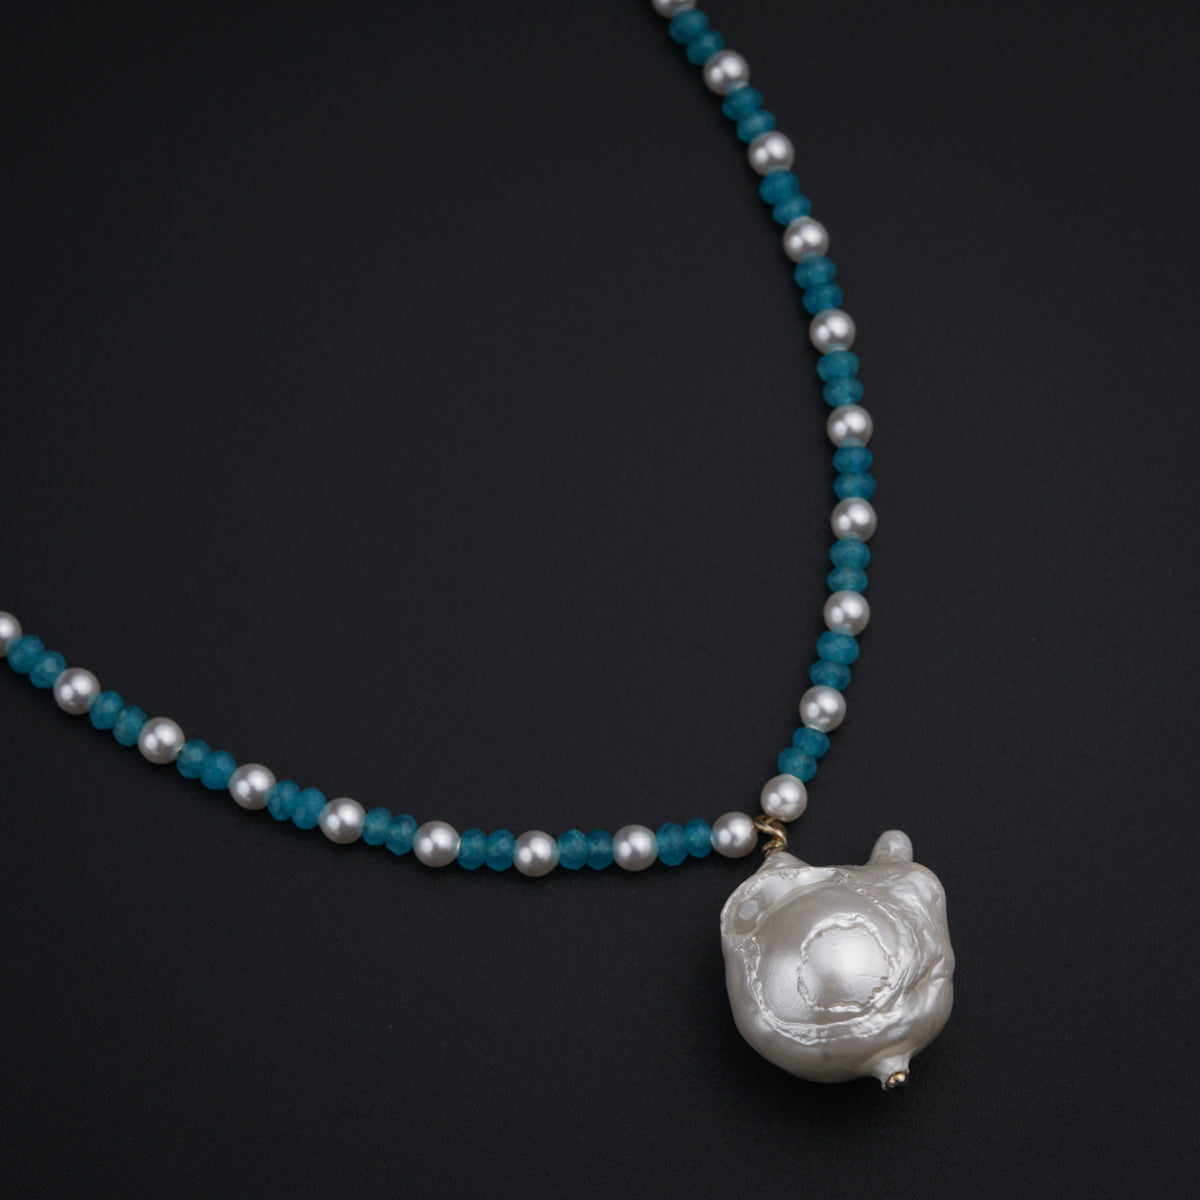 a necklace with a white flower and blue beads